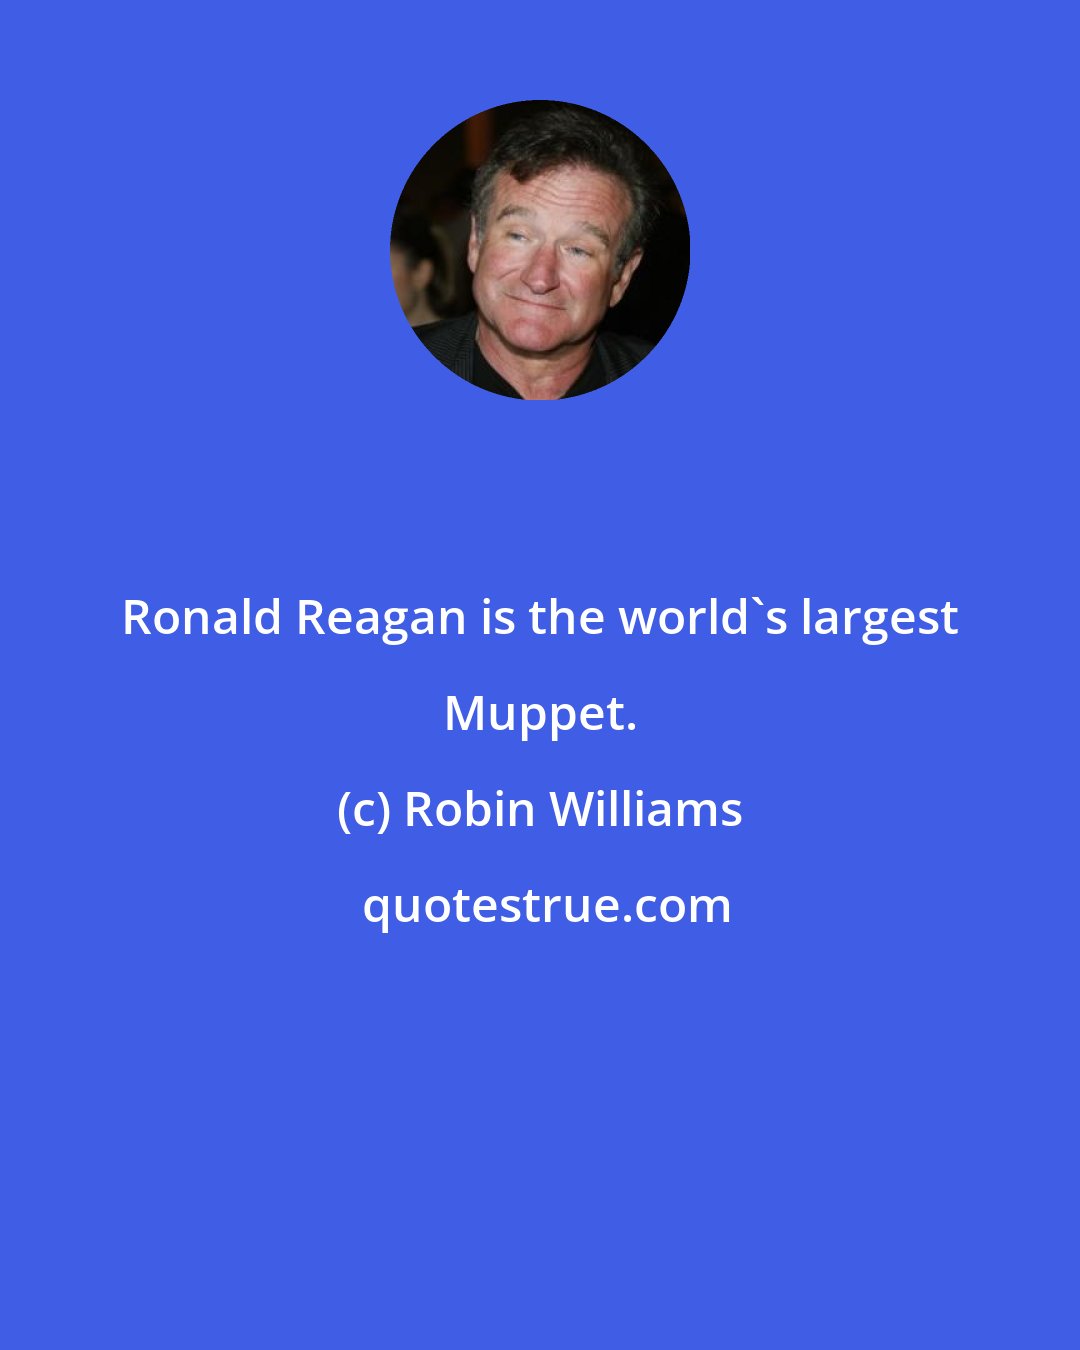 Robin Williams: Ronald Reagan is the world's largest Muppet.